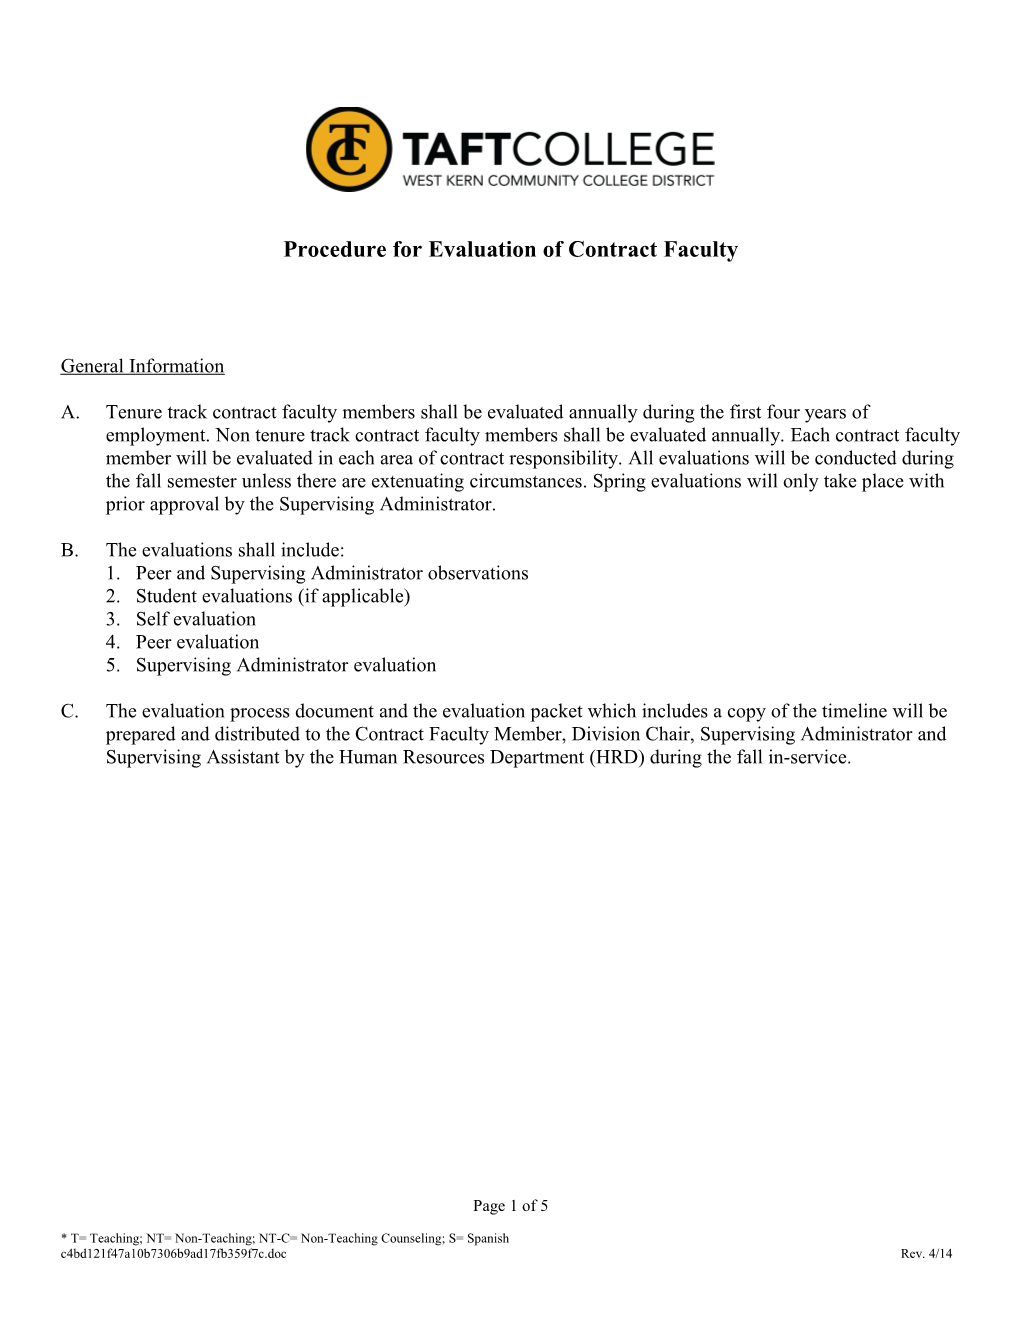 Procedure for Evaluation of Contract Faculty